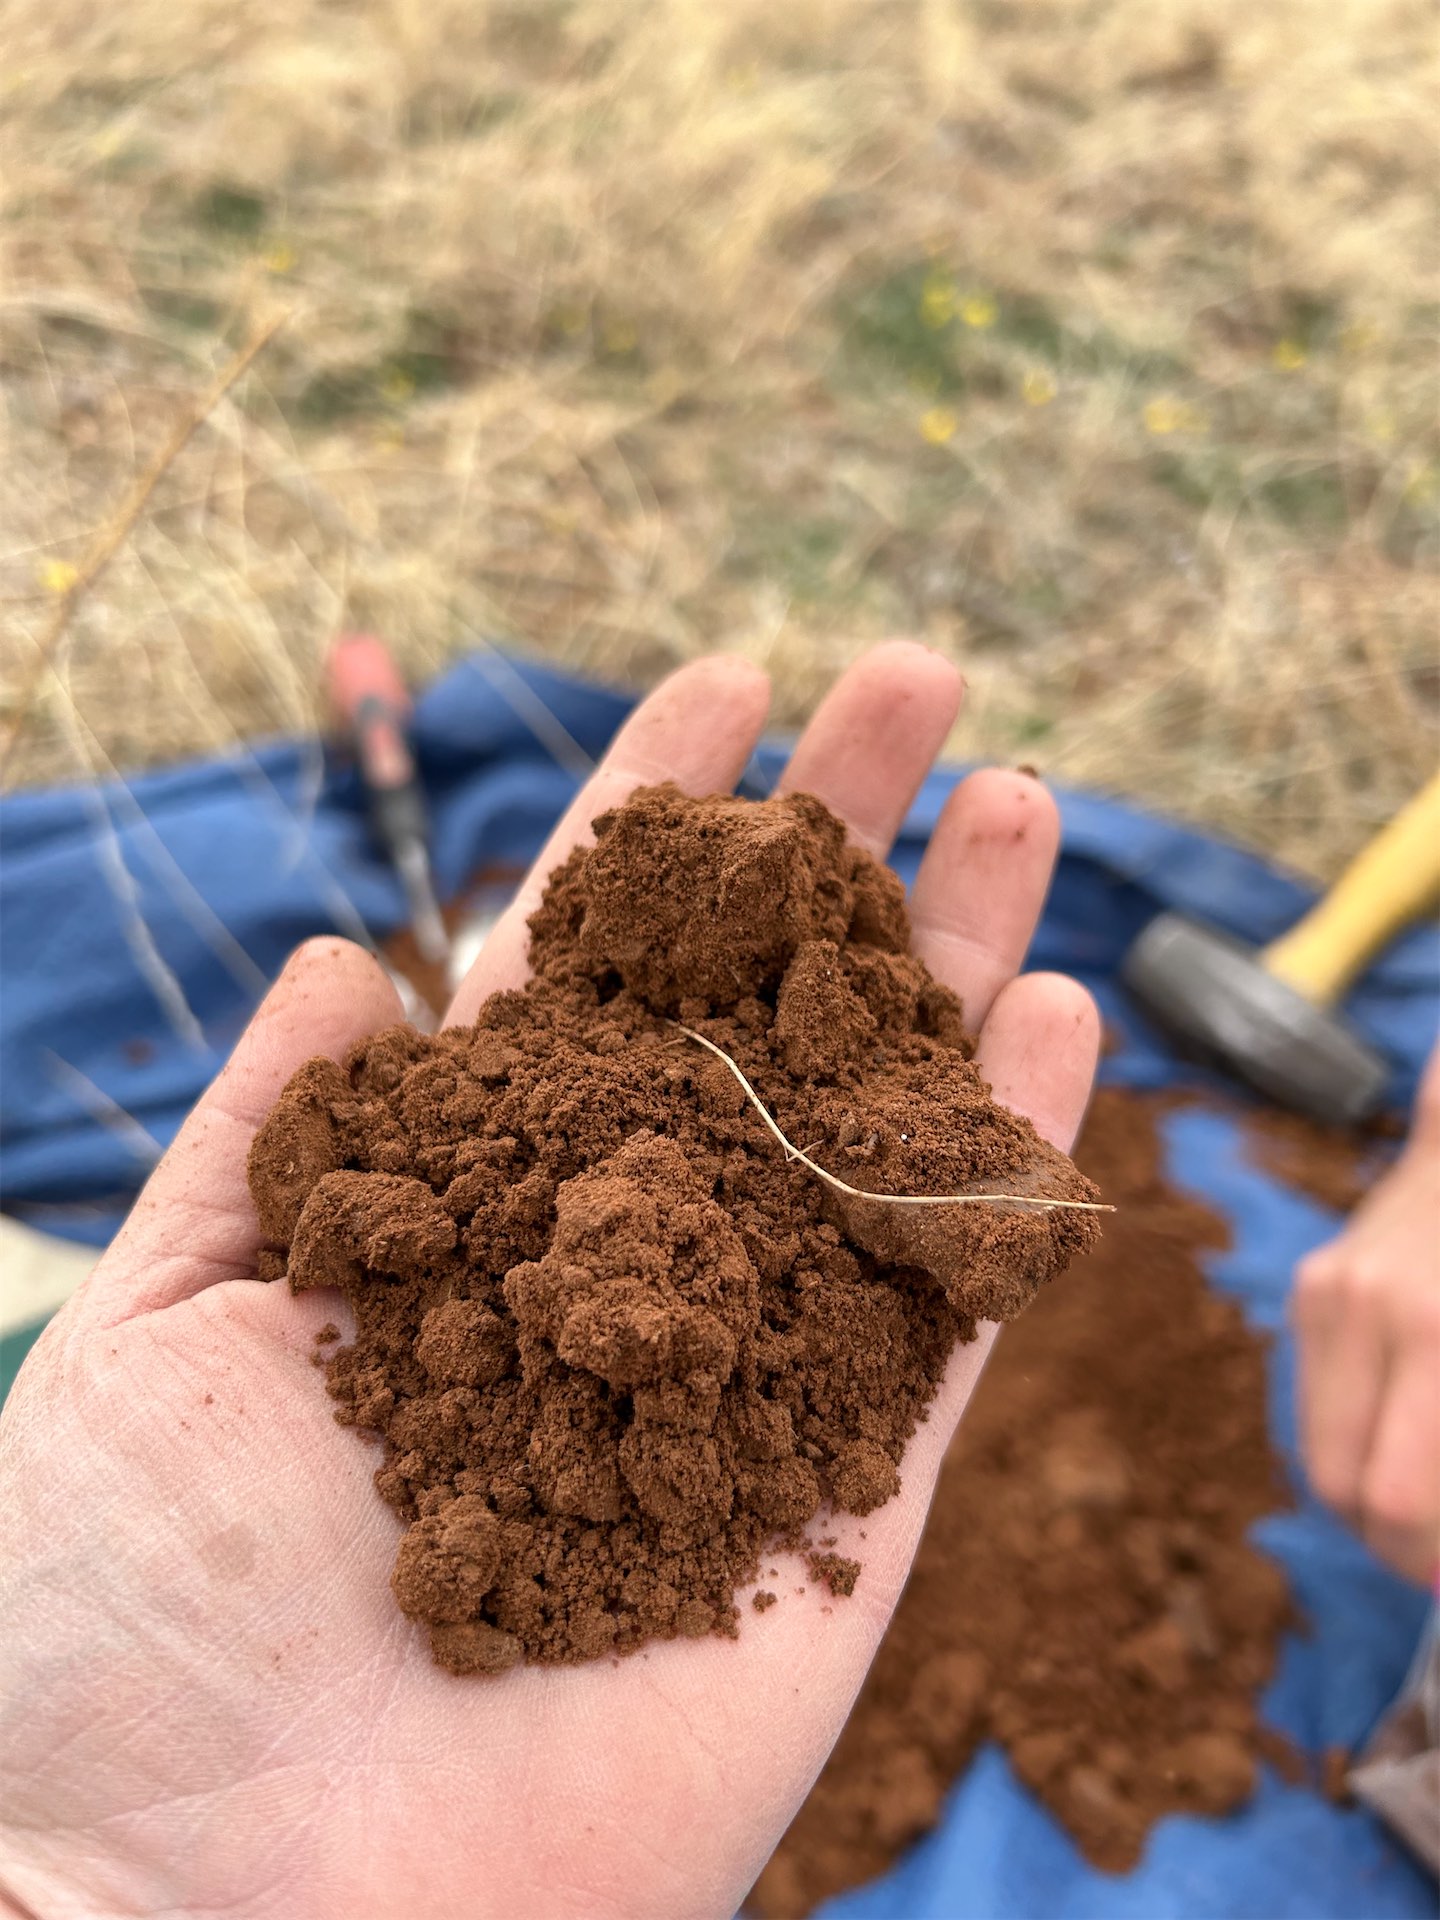 Soil sampling is helping to establish a baseline to measure improvements against. Photo by Megan Nasto, Working Lands Conservation.